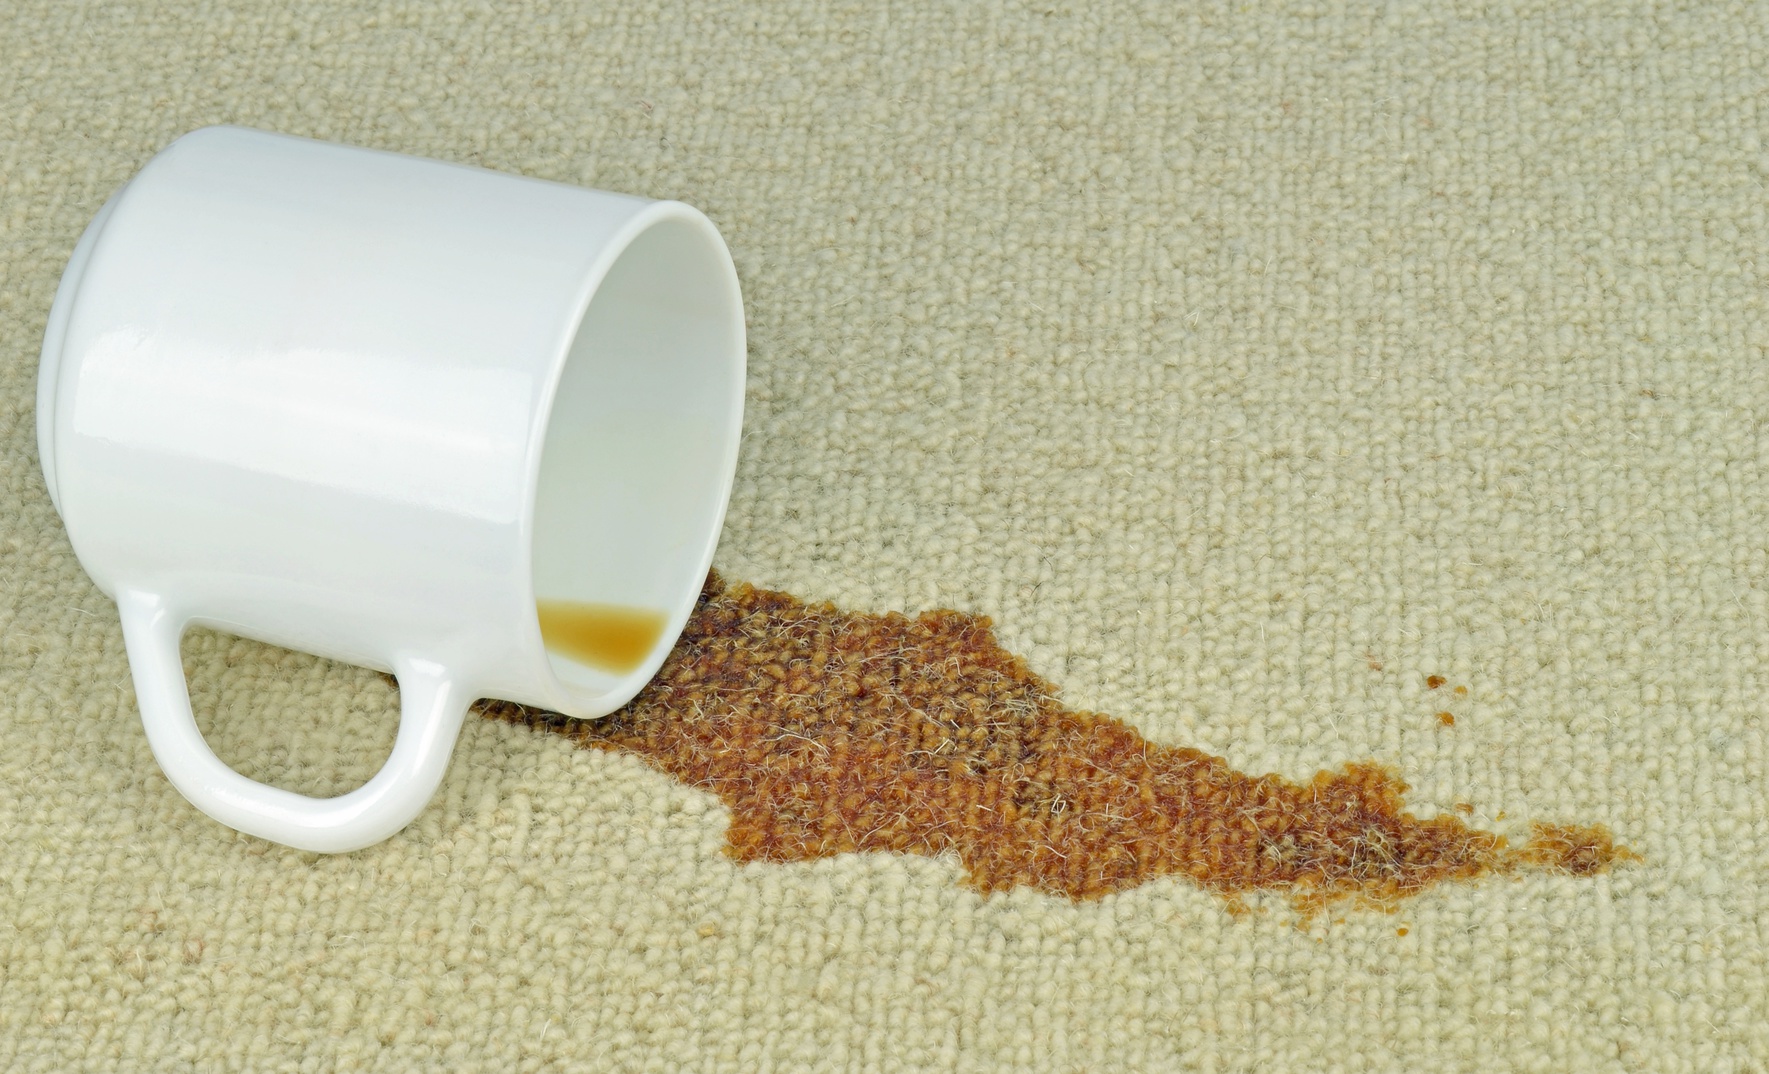 MultiClean Coffee Stains Removing Beverage Stains From